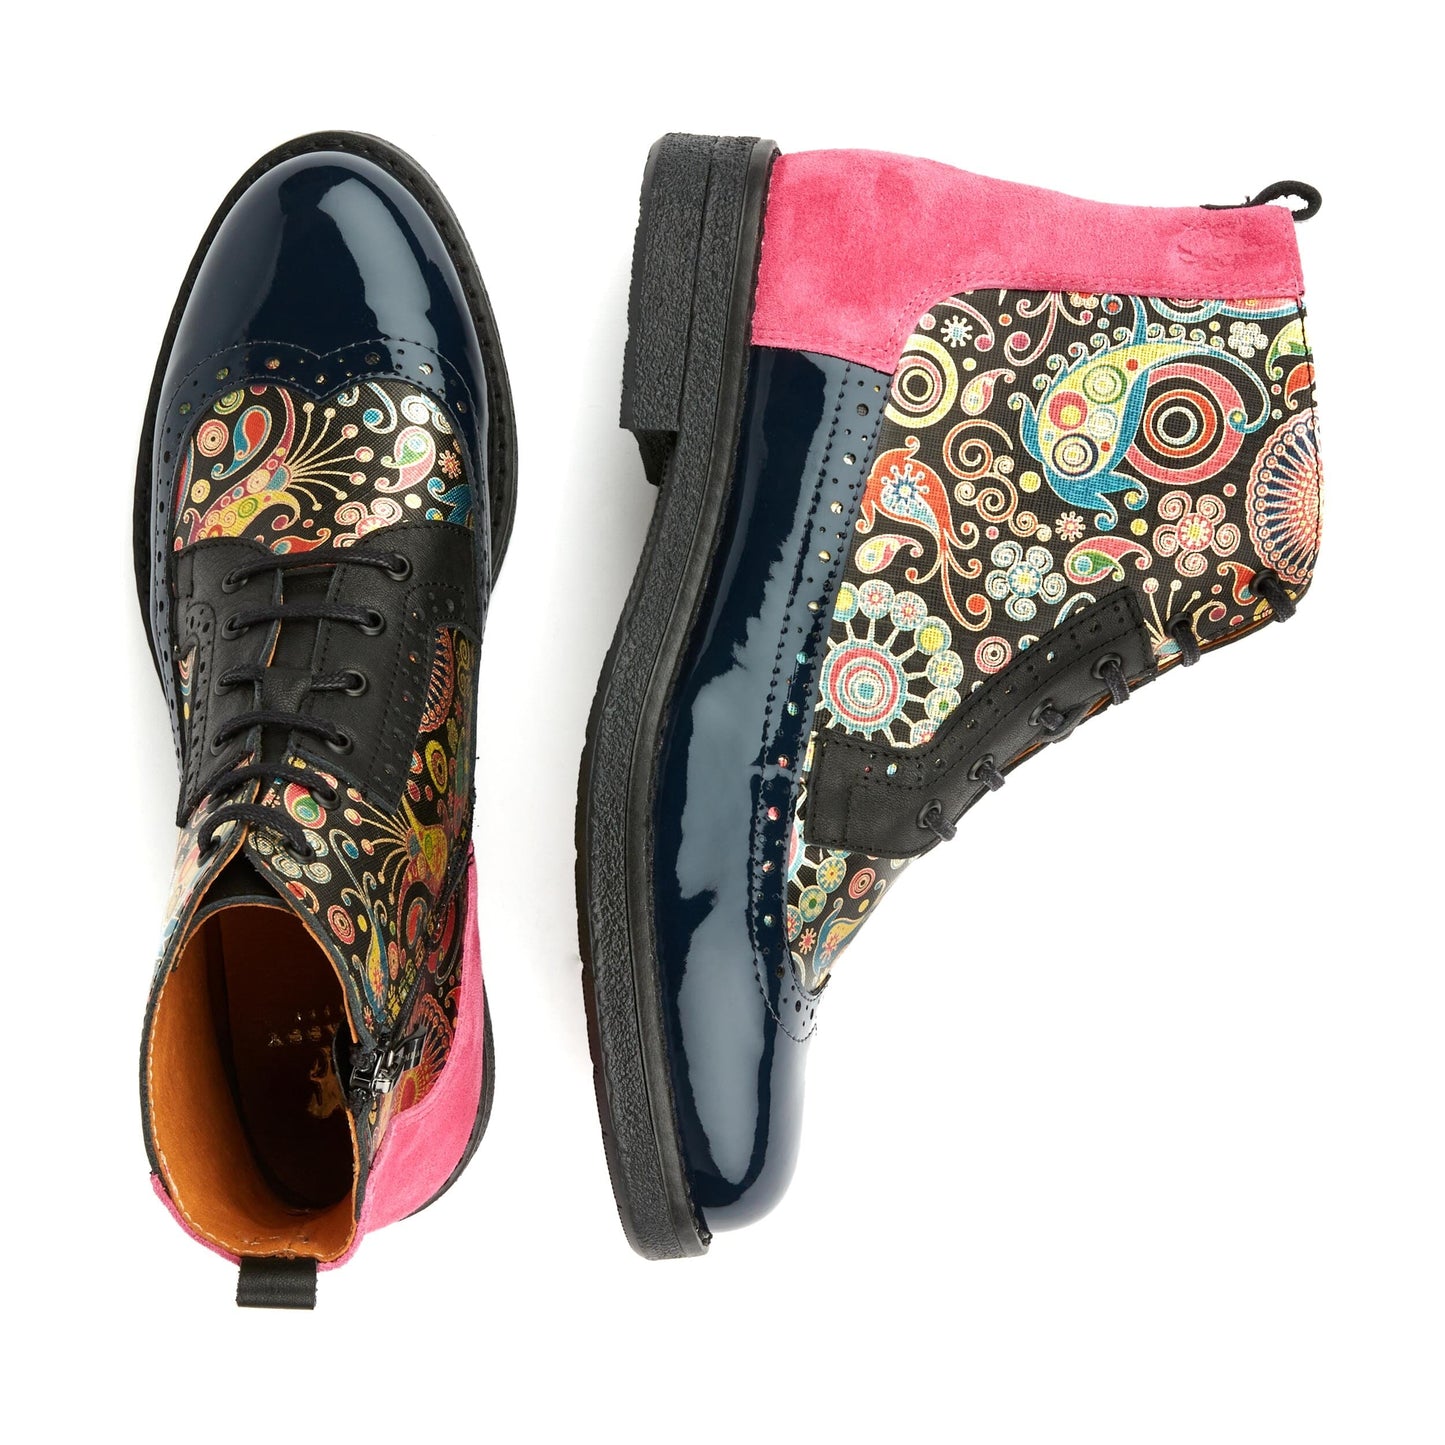 Hatter - Navy Pink Ankle Boots Embassy London 